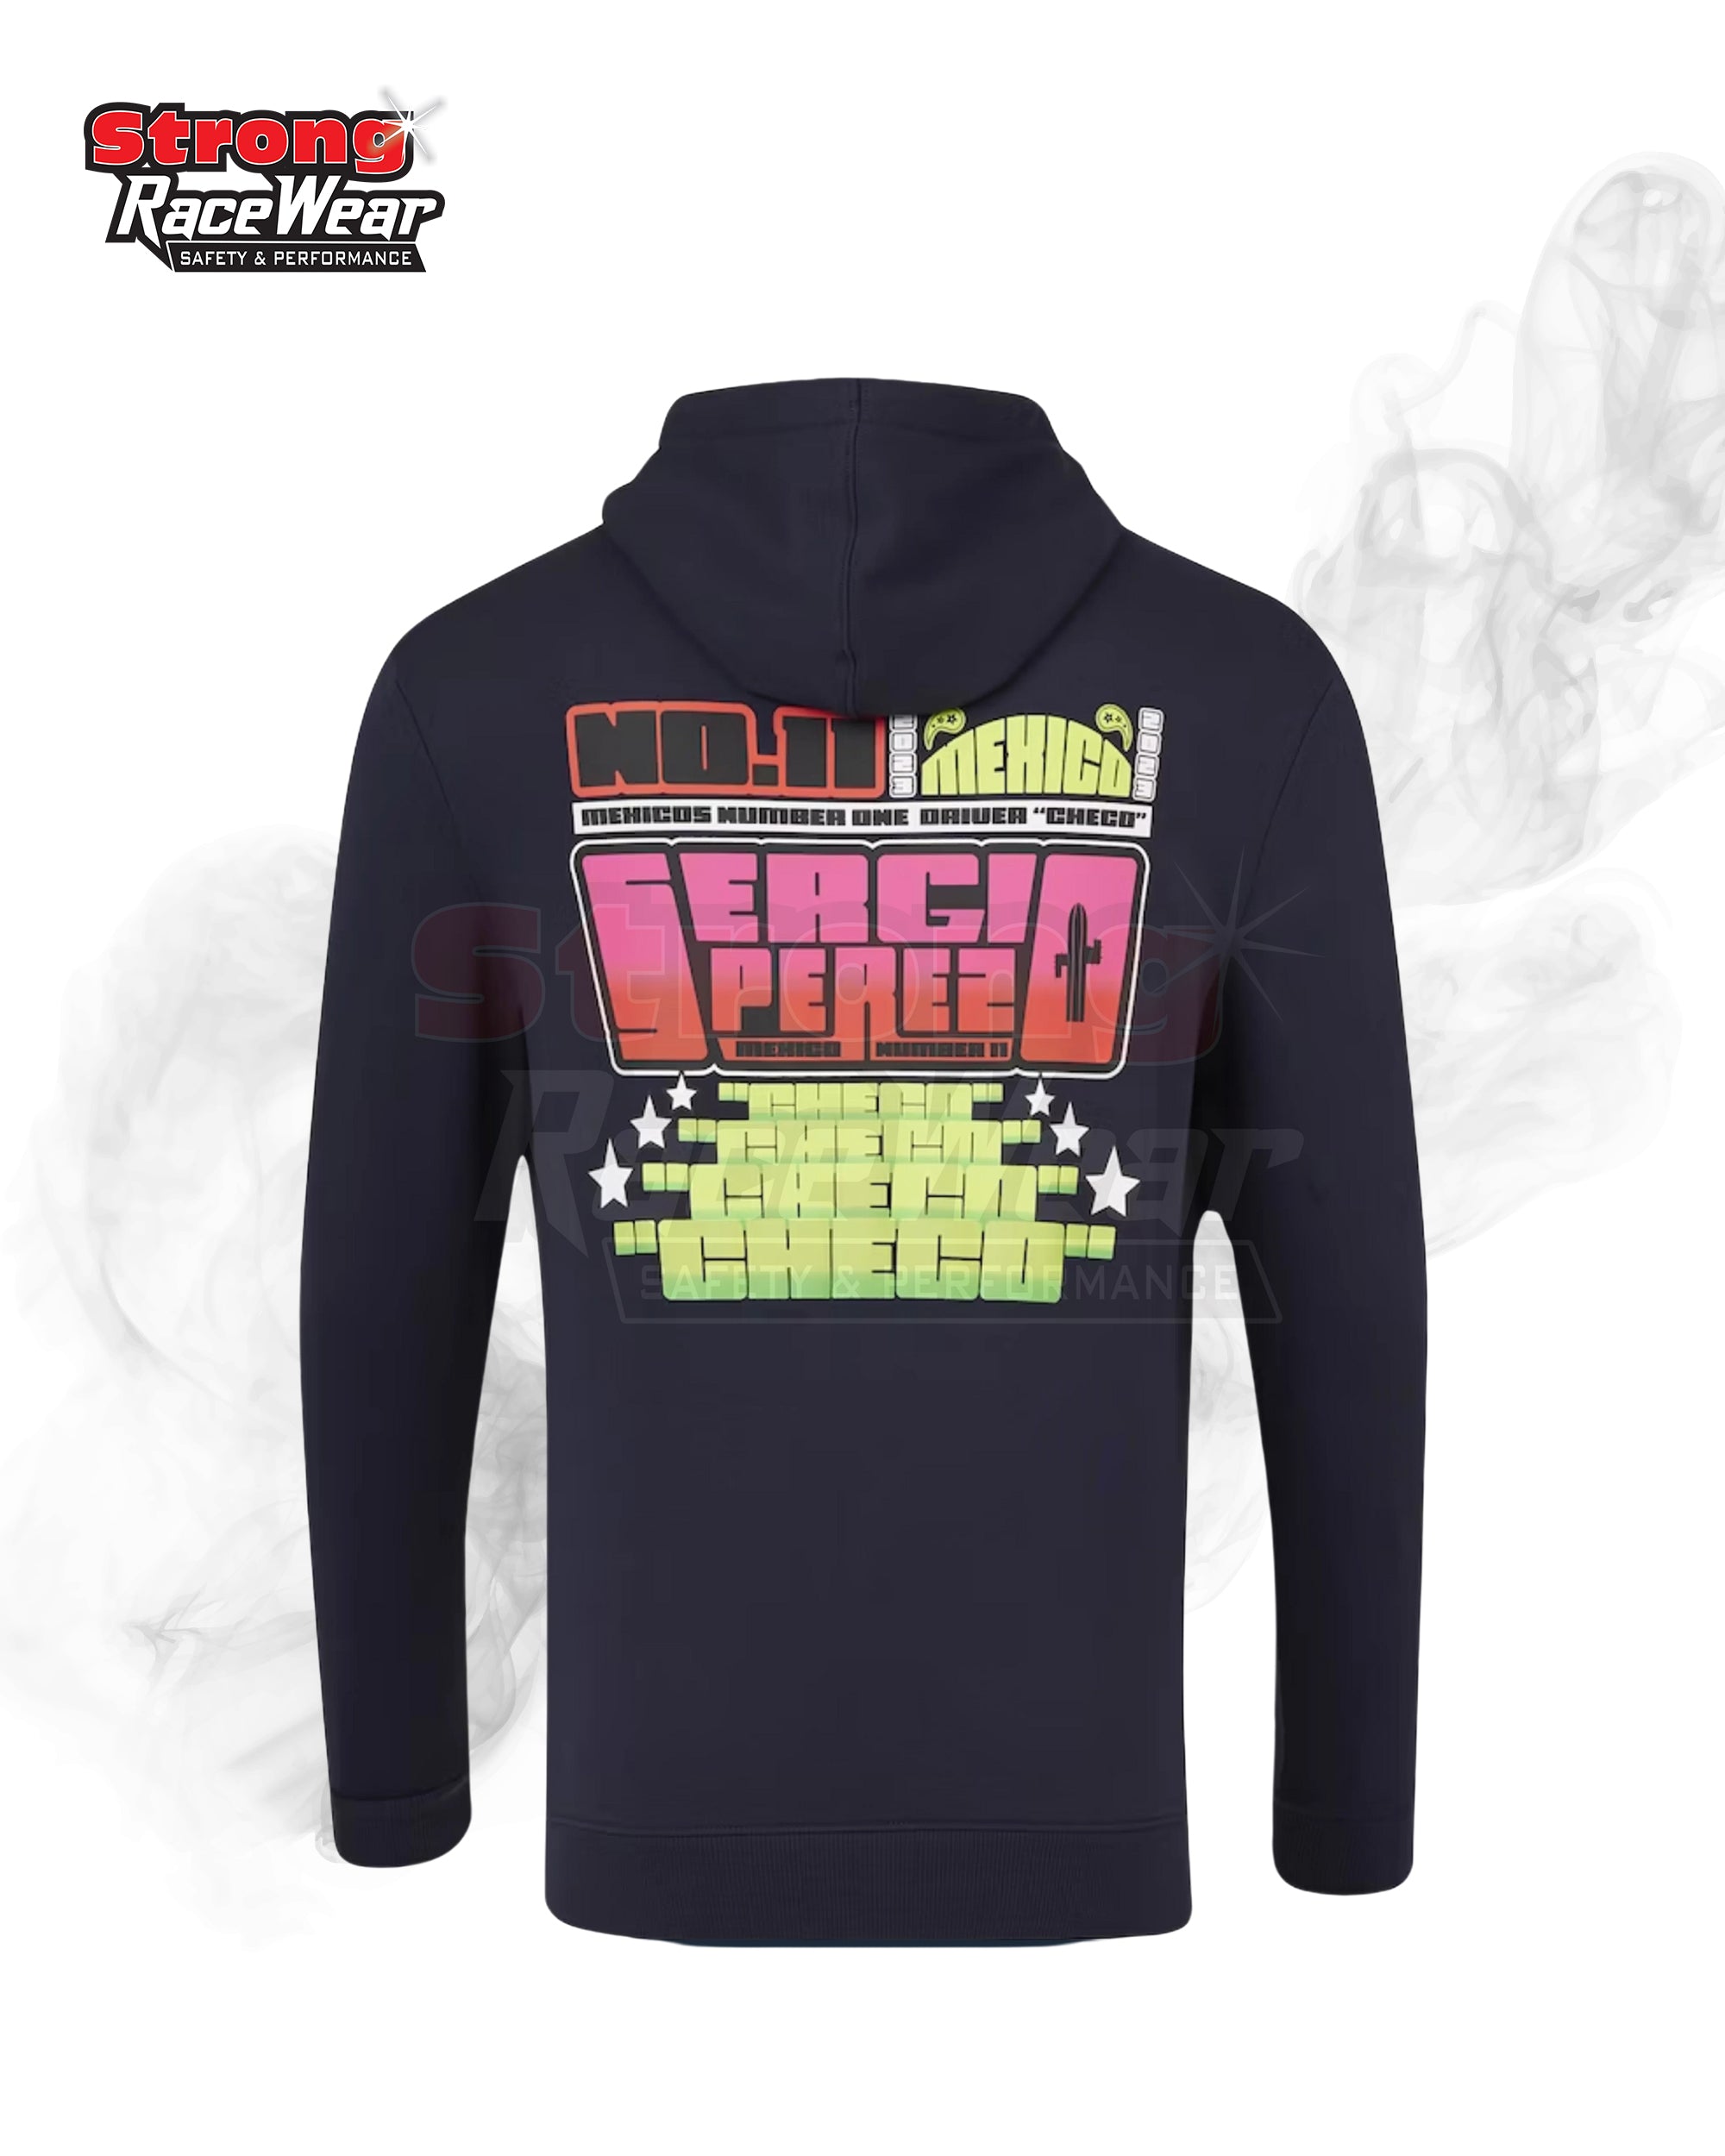 Oracle Red Bull Racing Sergio Perez Mexico Special Edition Hoodies